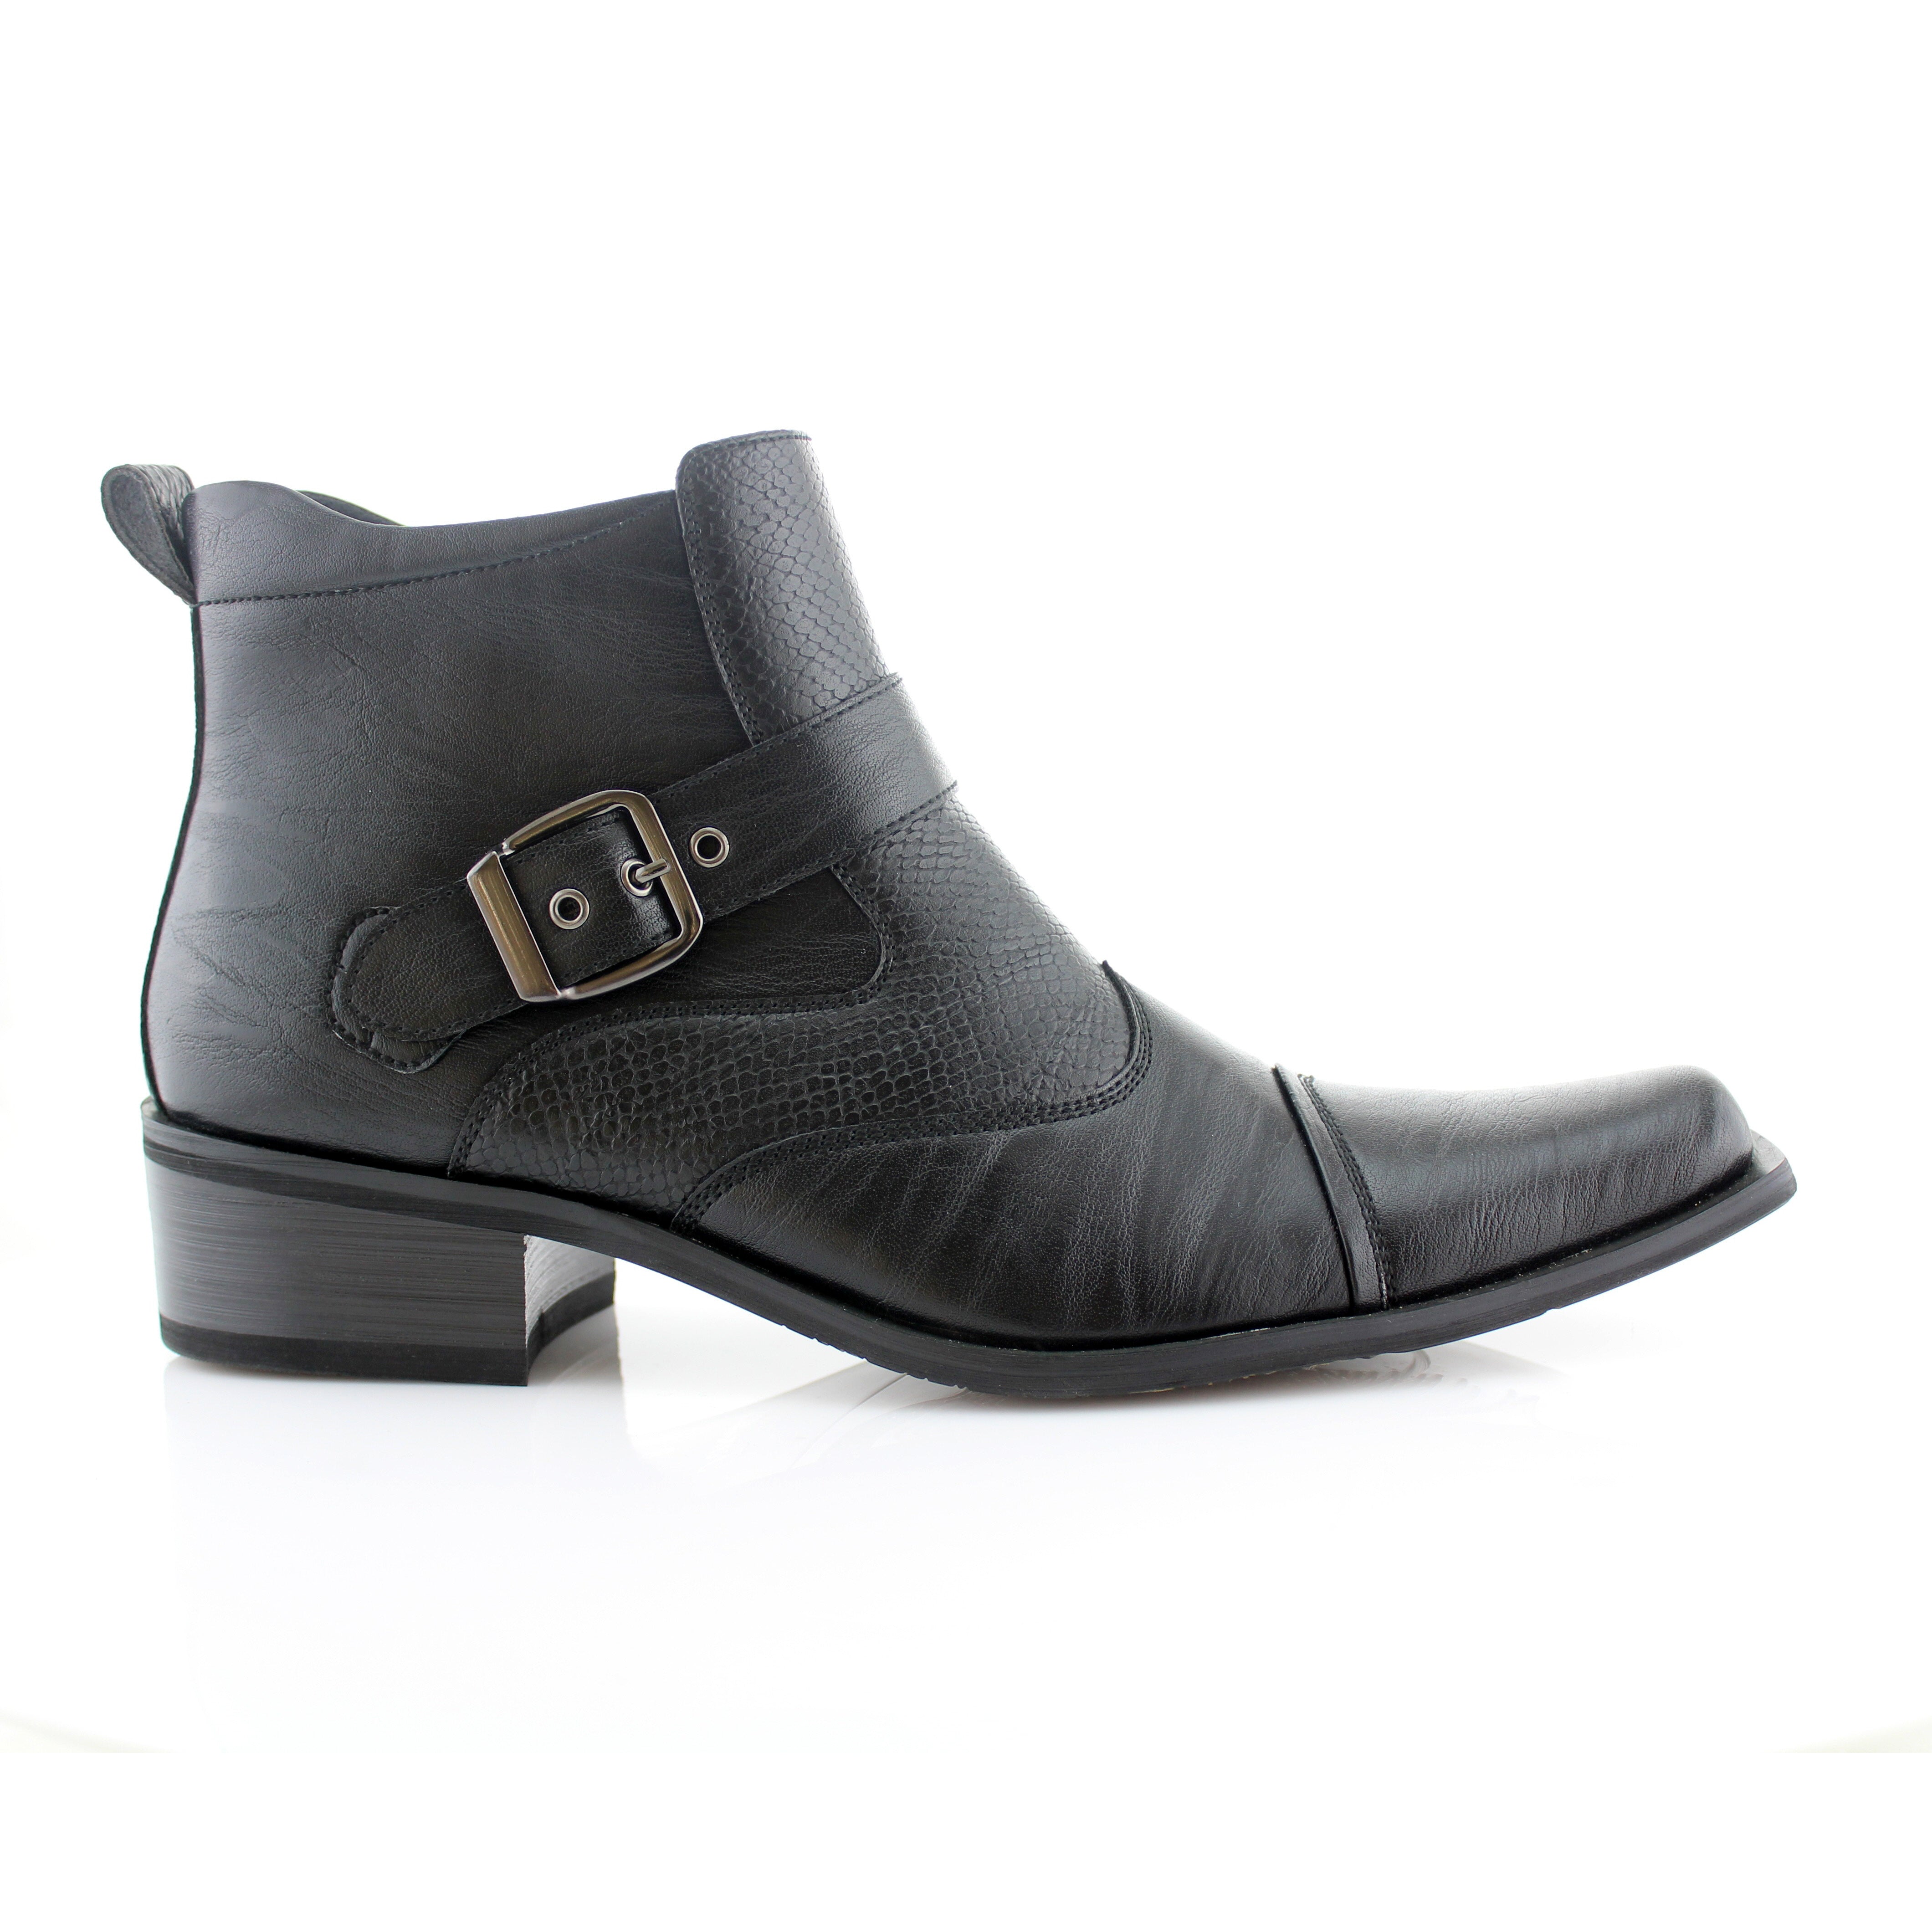 Snake Hide Embossed Cowboy Boots | Alejandro by Ferro Aldo | Conal Footwear | Outer Side Angle View